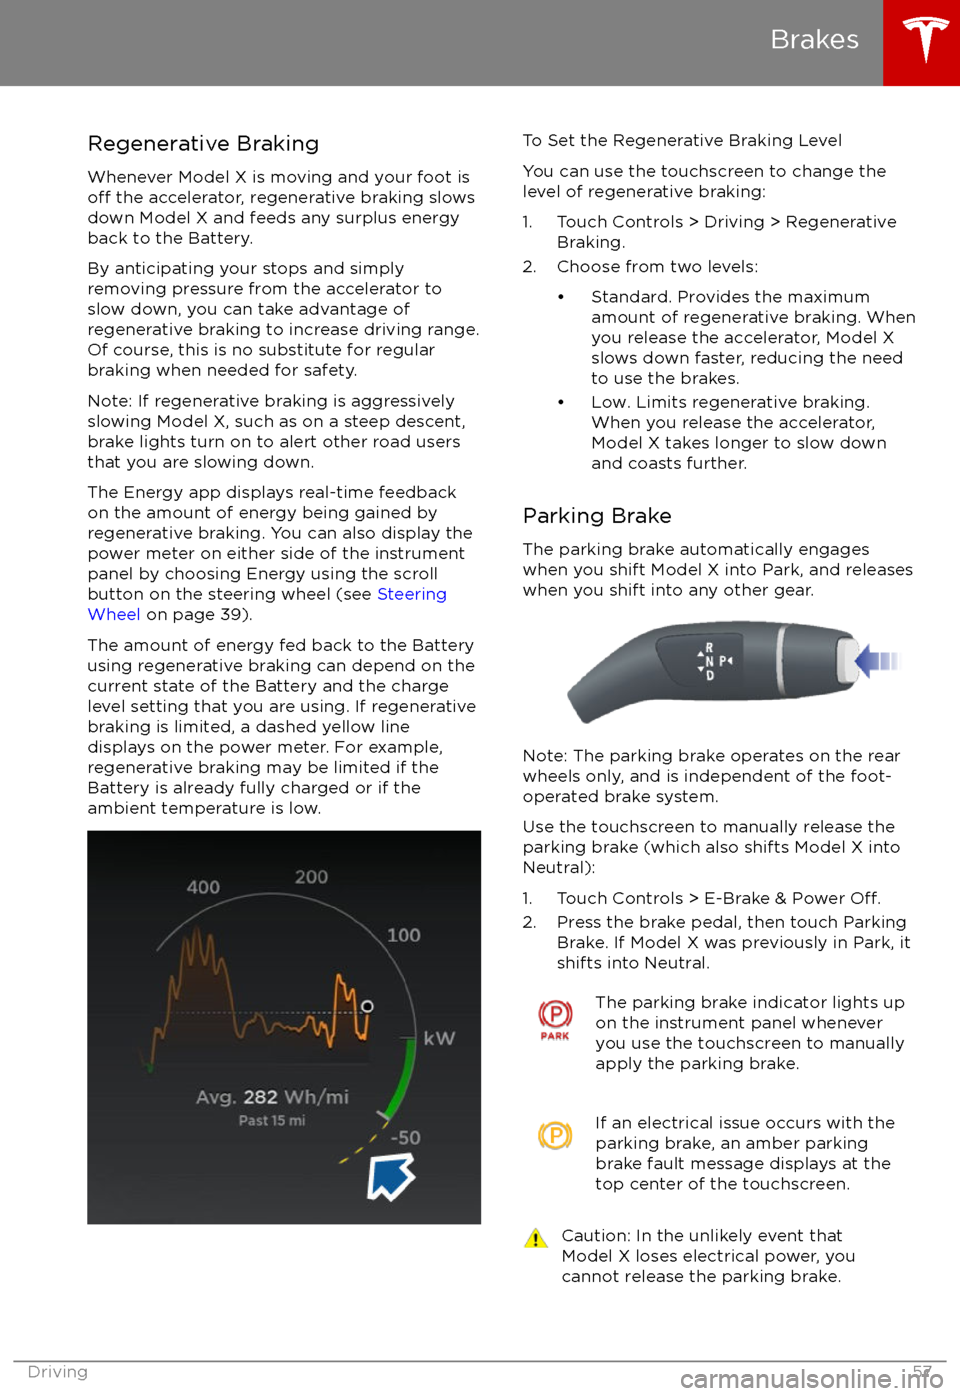 TESLA MODEL X 2017  Owners Manual  Regenerative Braking
Whenever Model X is moving and your foot is
off the accelerator, regenerative braking slows
down Model X and feeds any surplus energy
back to the Battery.
By anticipating your sto